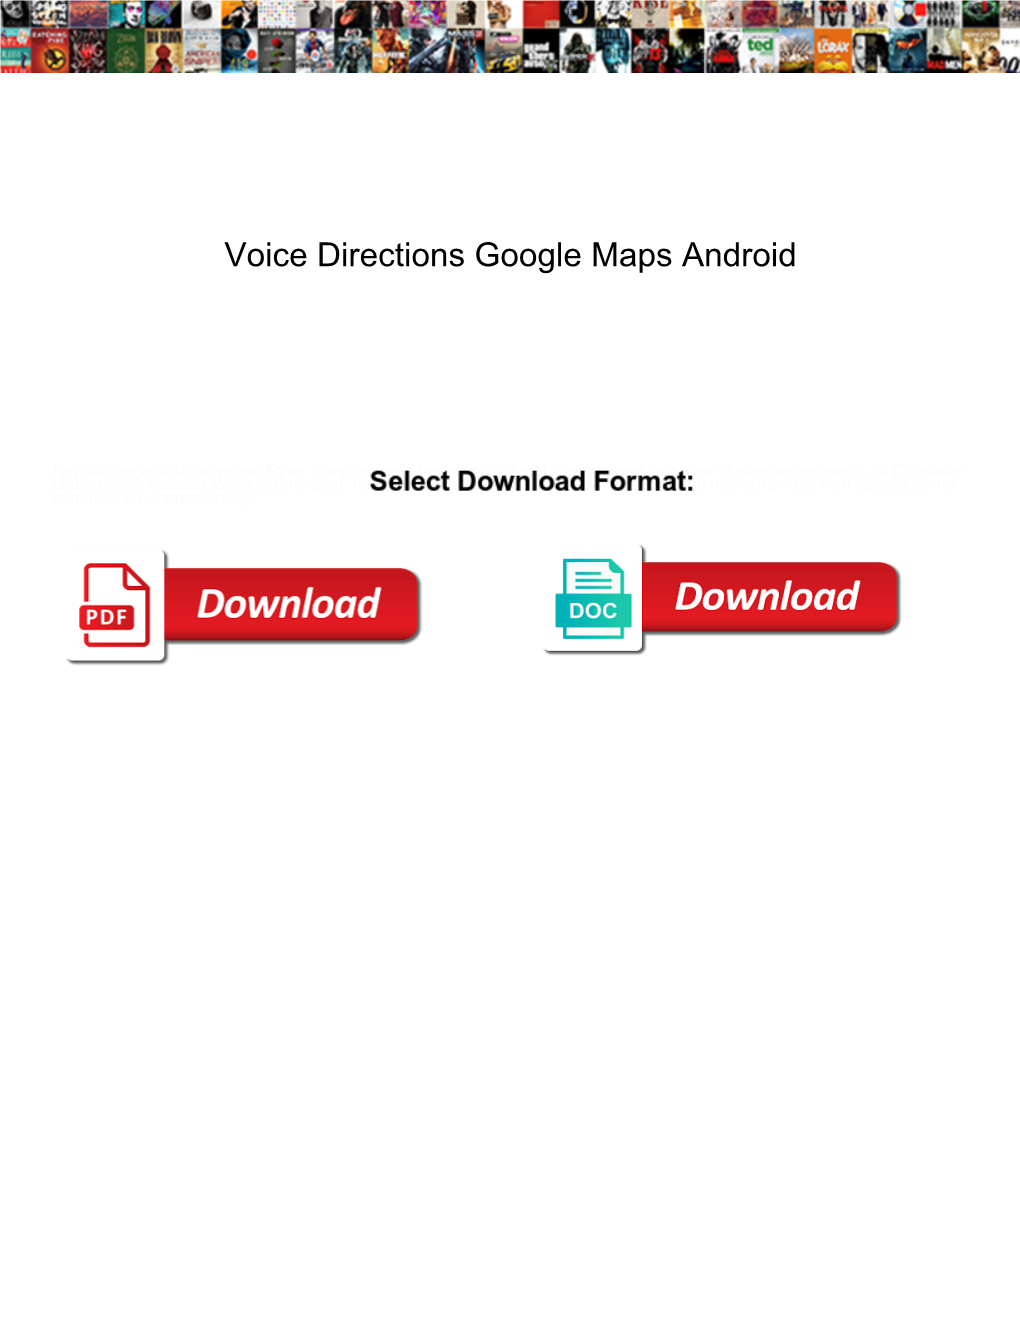 Voice Directions Google Maps Android